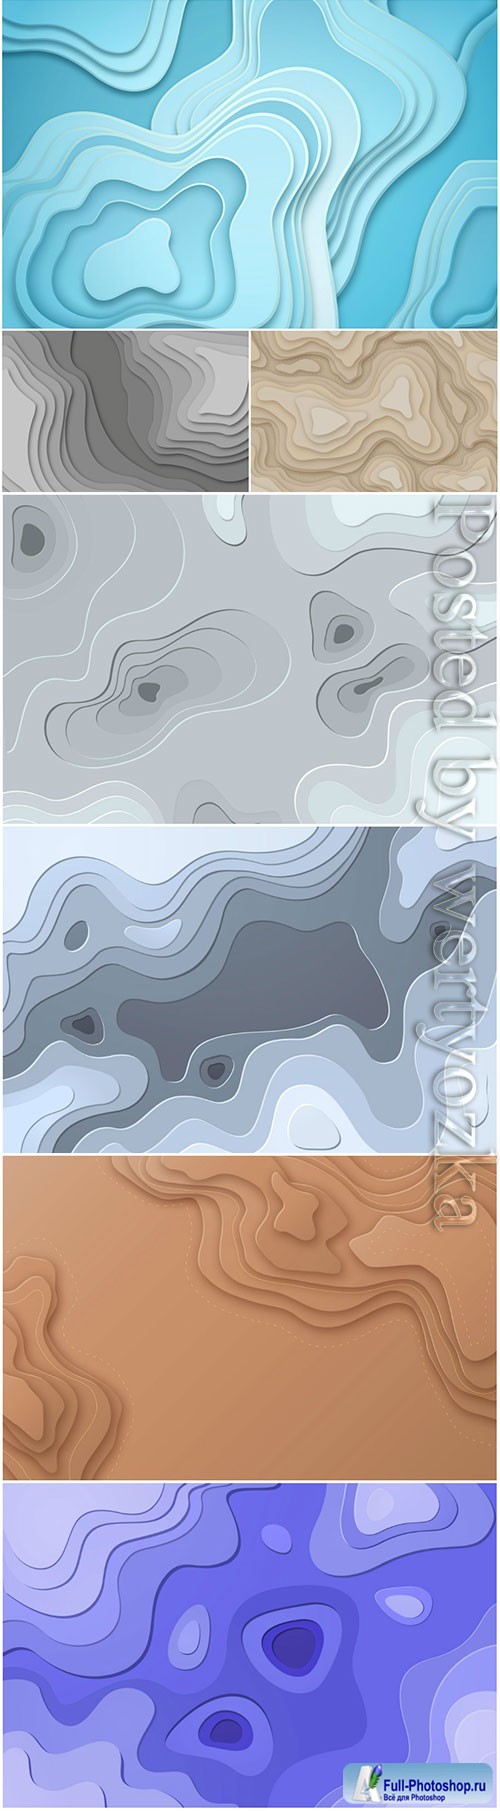 Topographic map wallpaper vector background concept